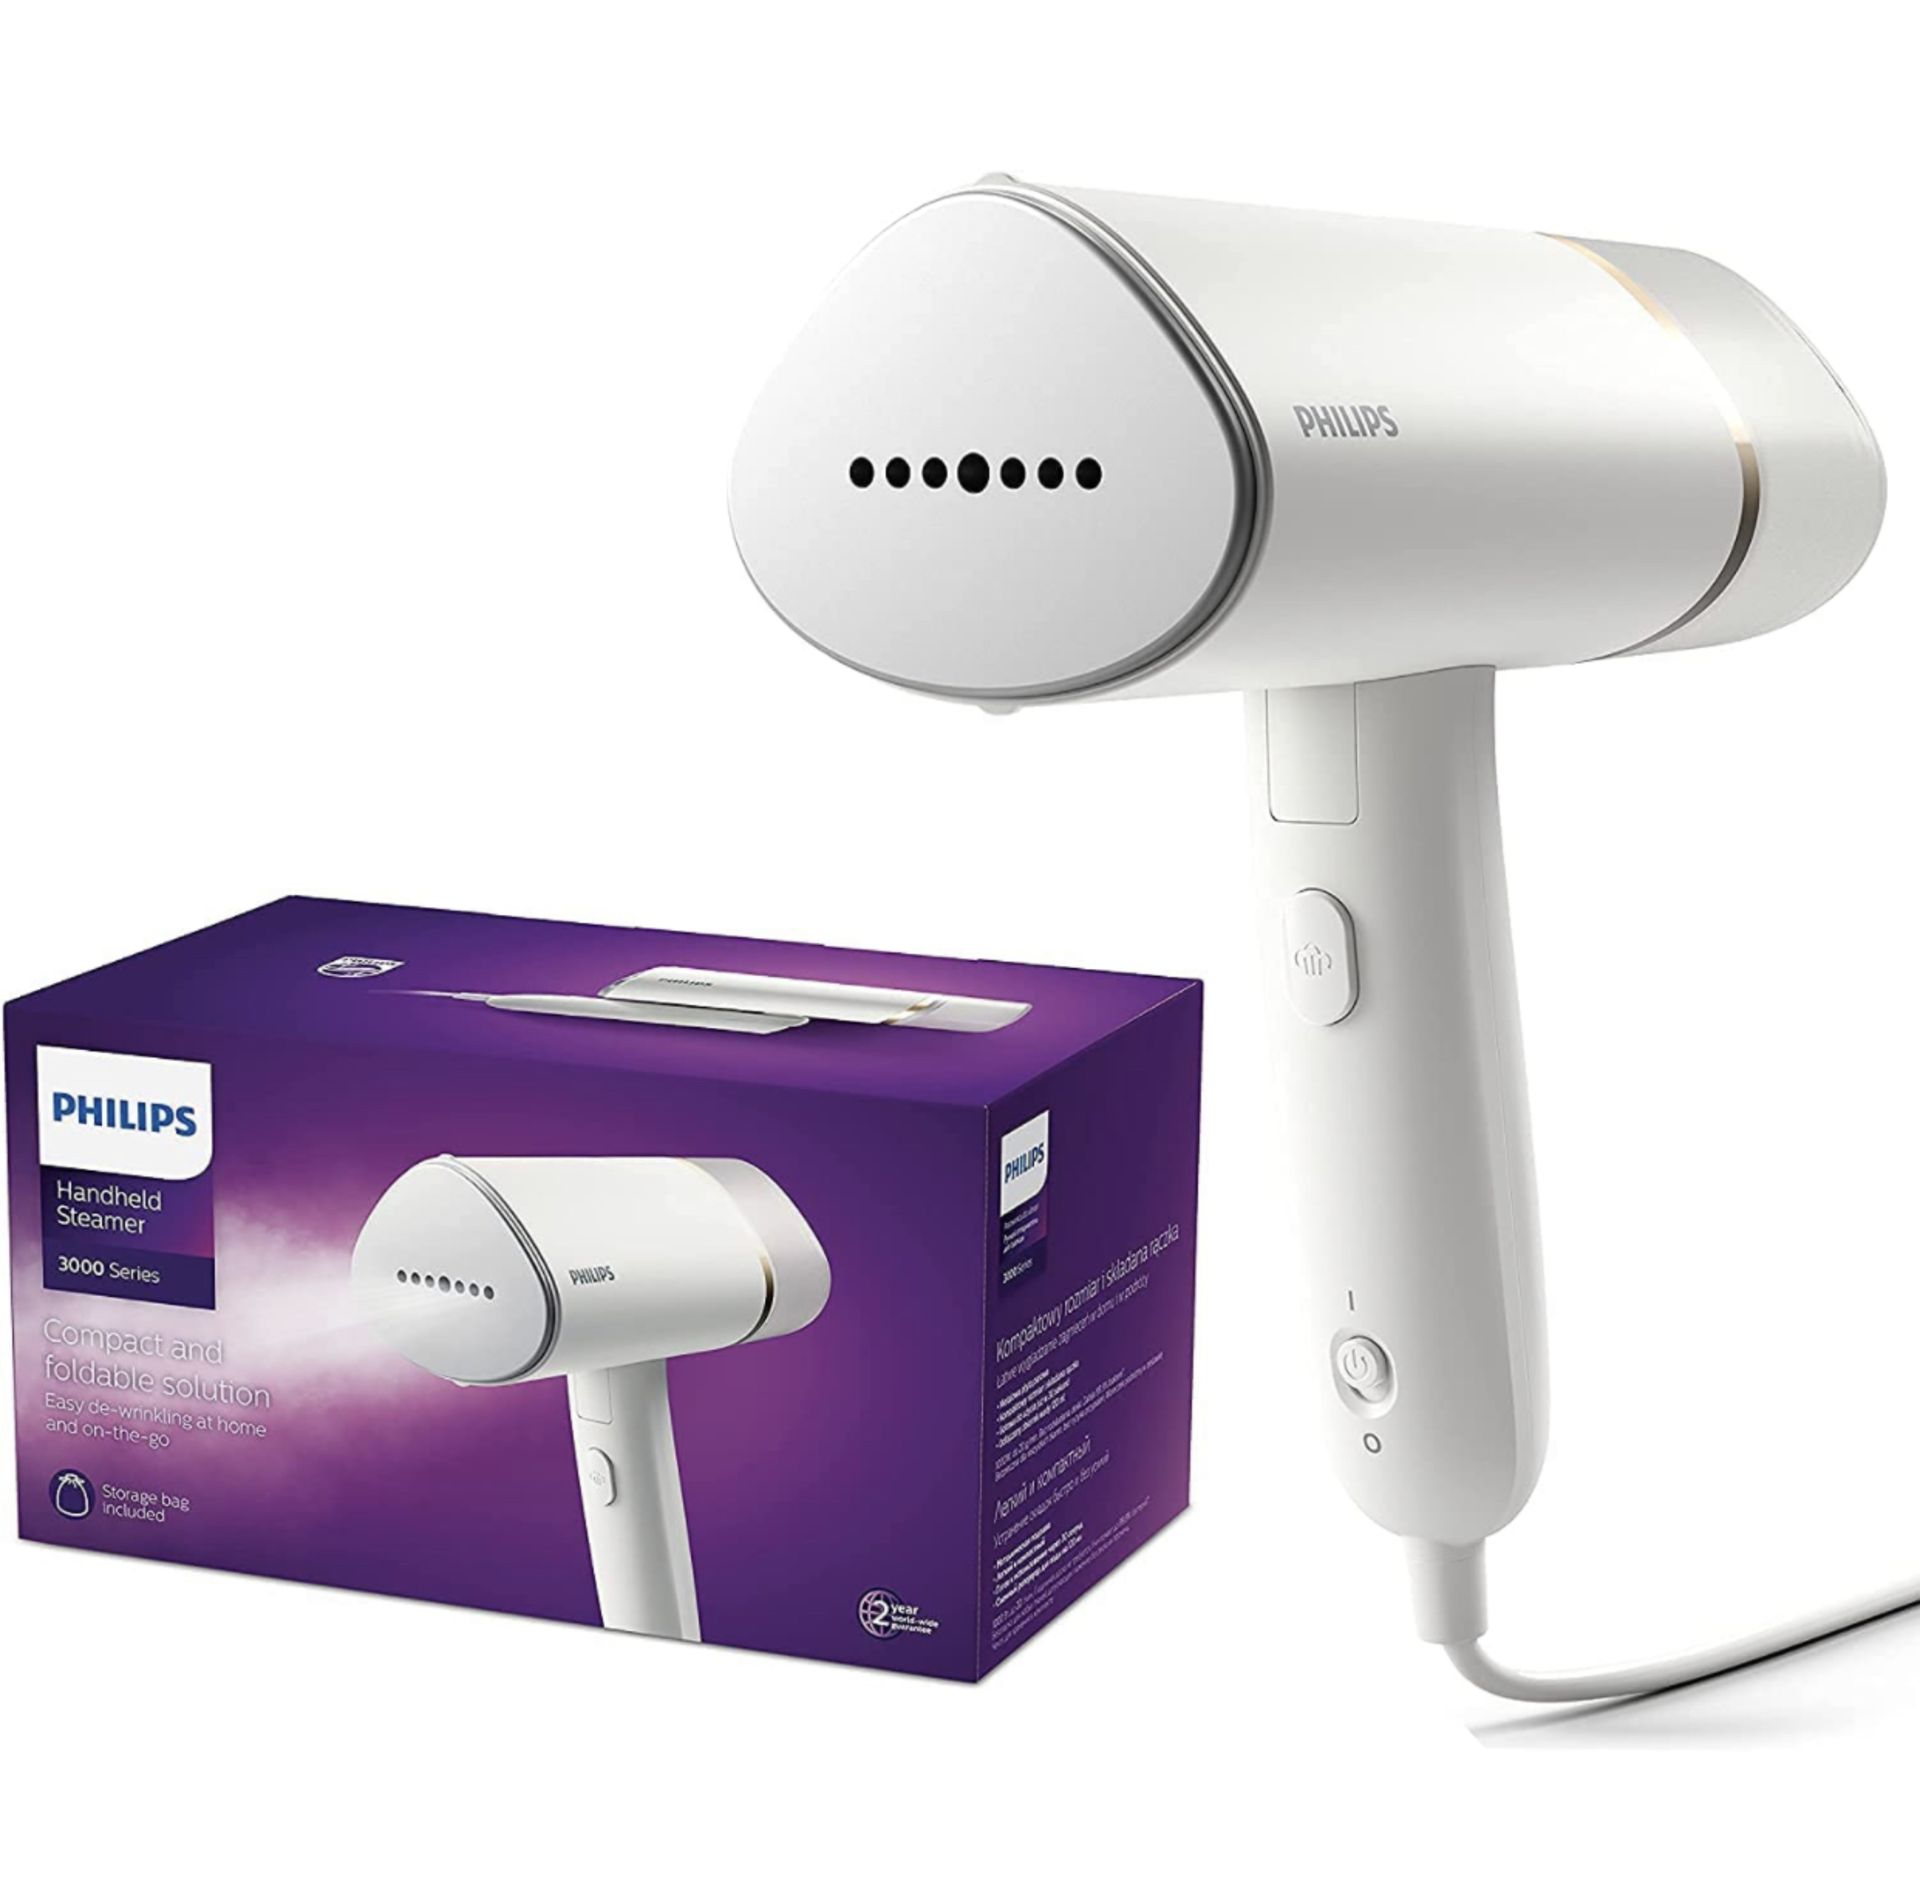 Philips Handheld Steamer 3000 Series Compact and Foldable RRP £59.99